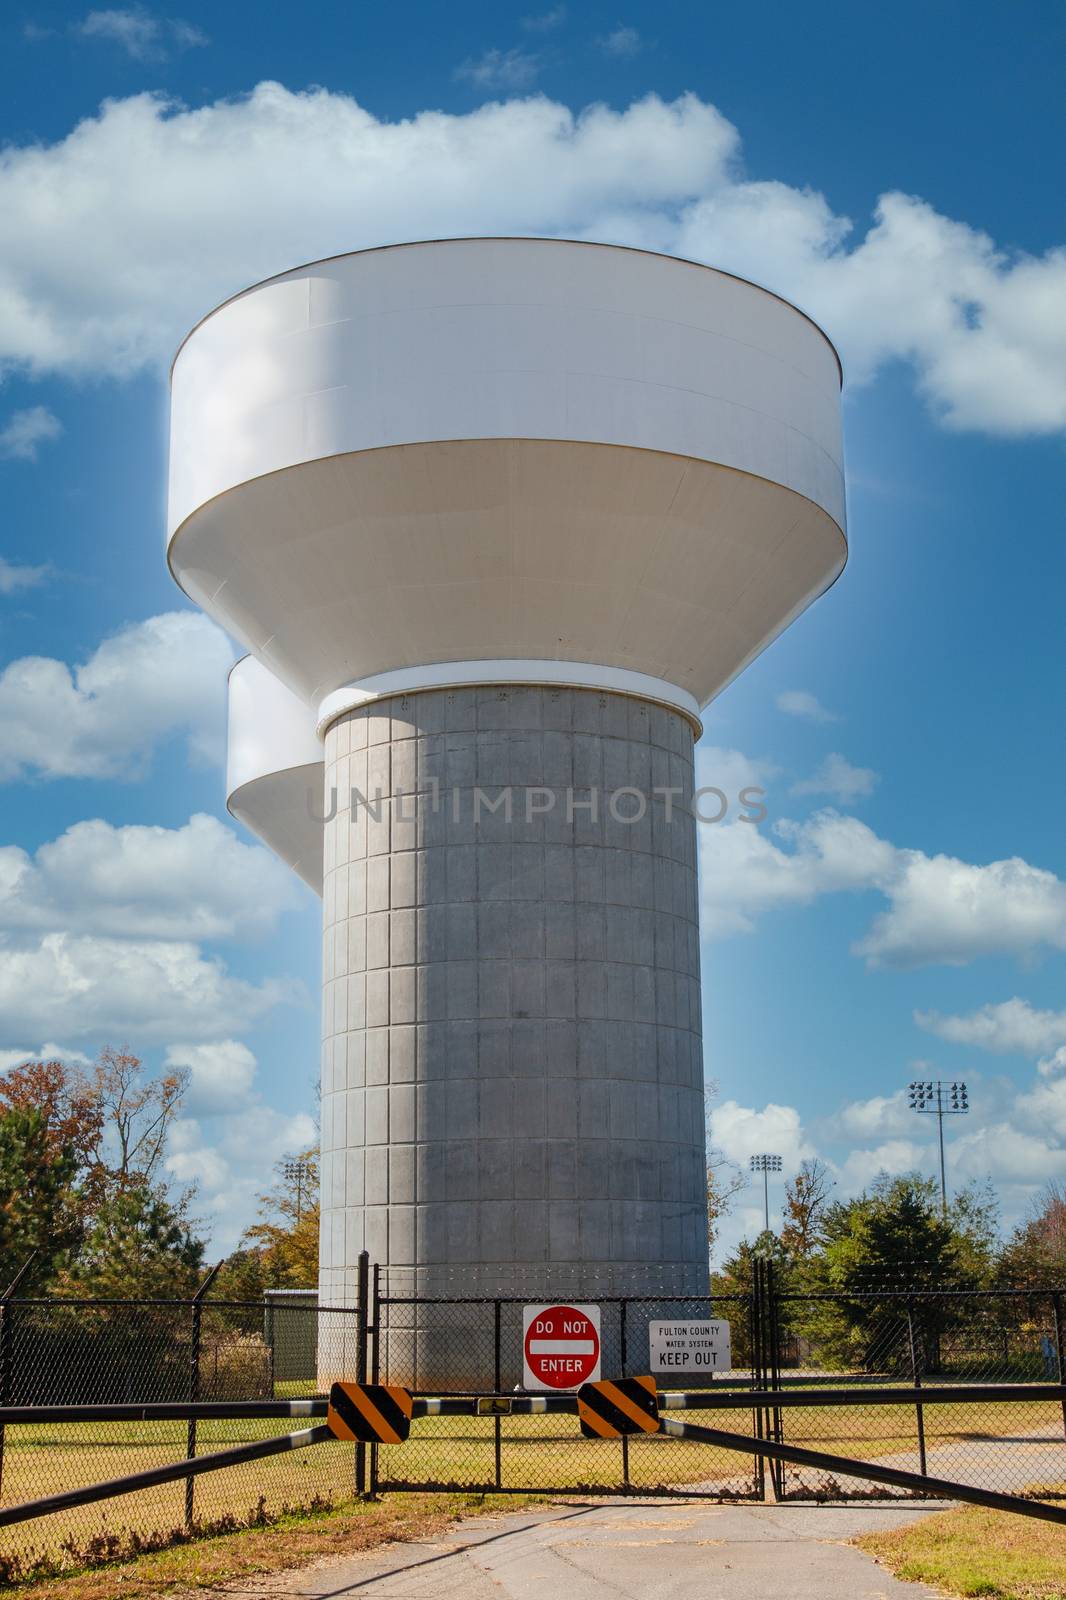 Two modern water towers behind black chain link fence